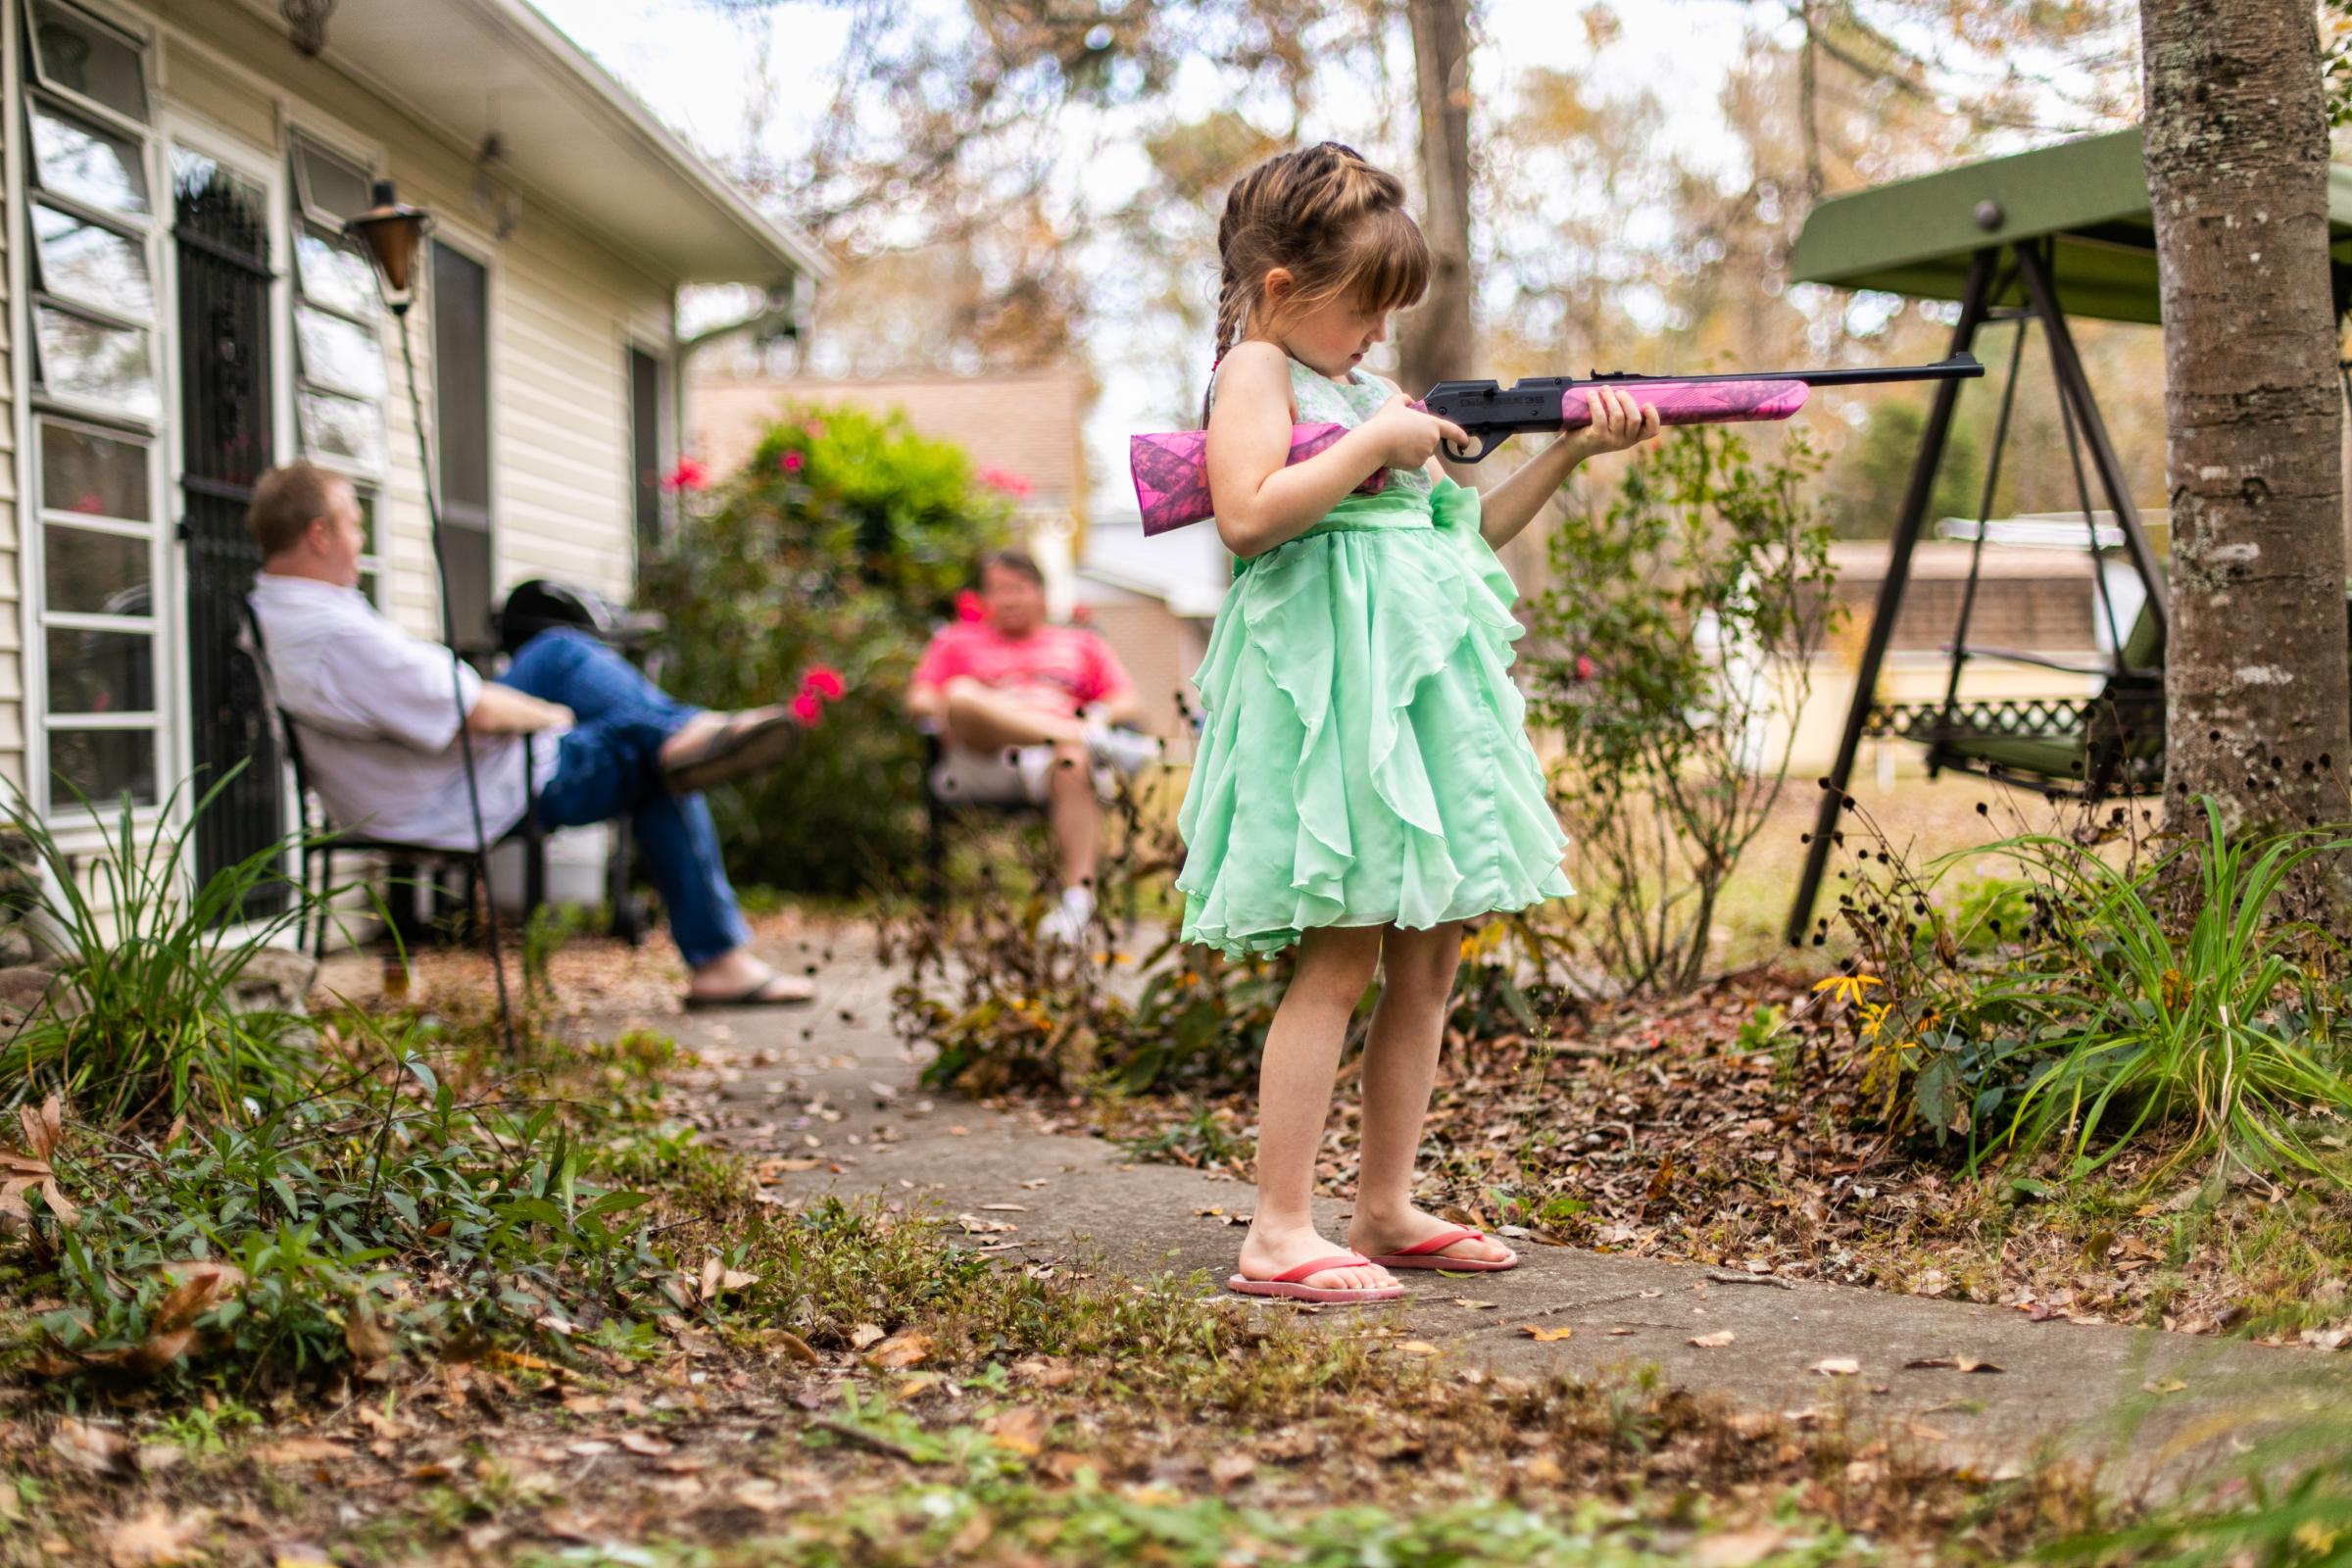 Growing Up - A young girl shows off her pink BB gun during a...